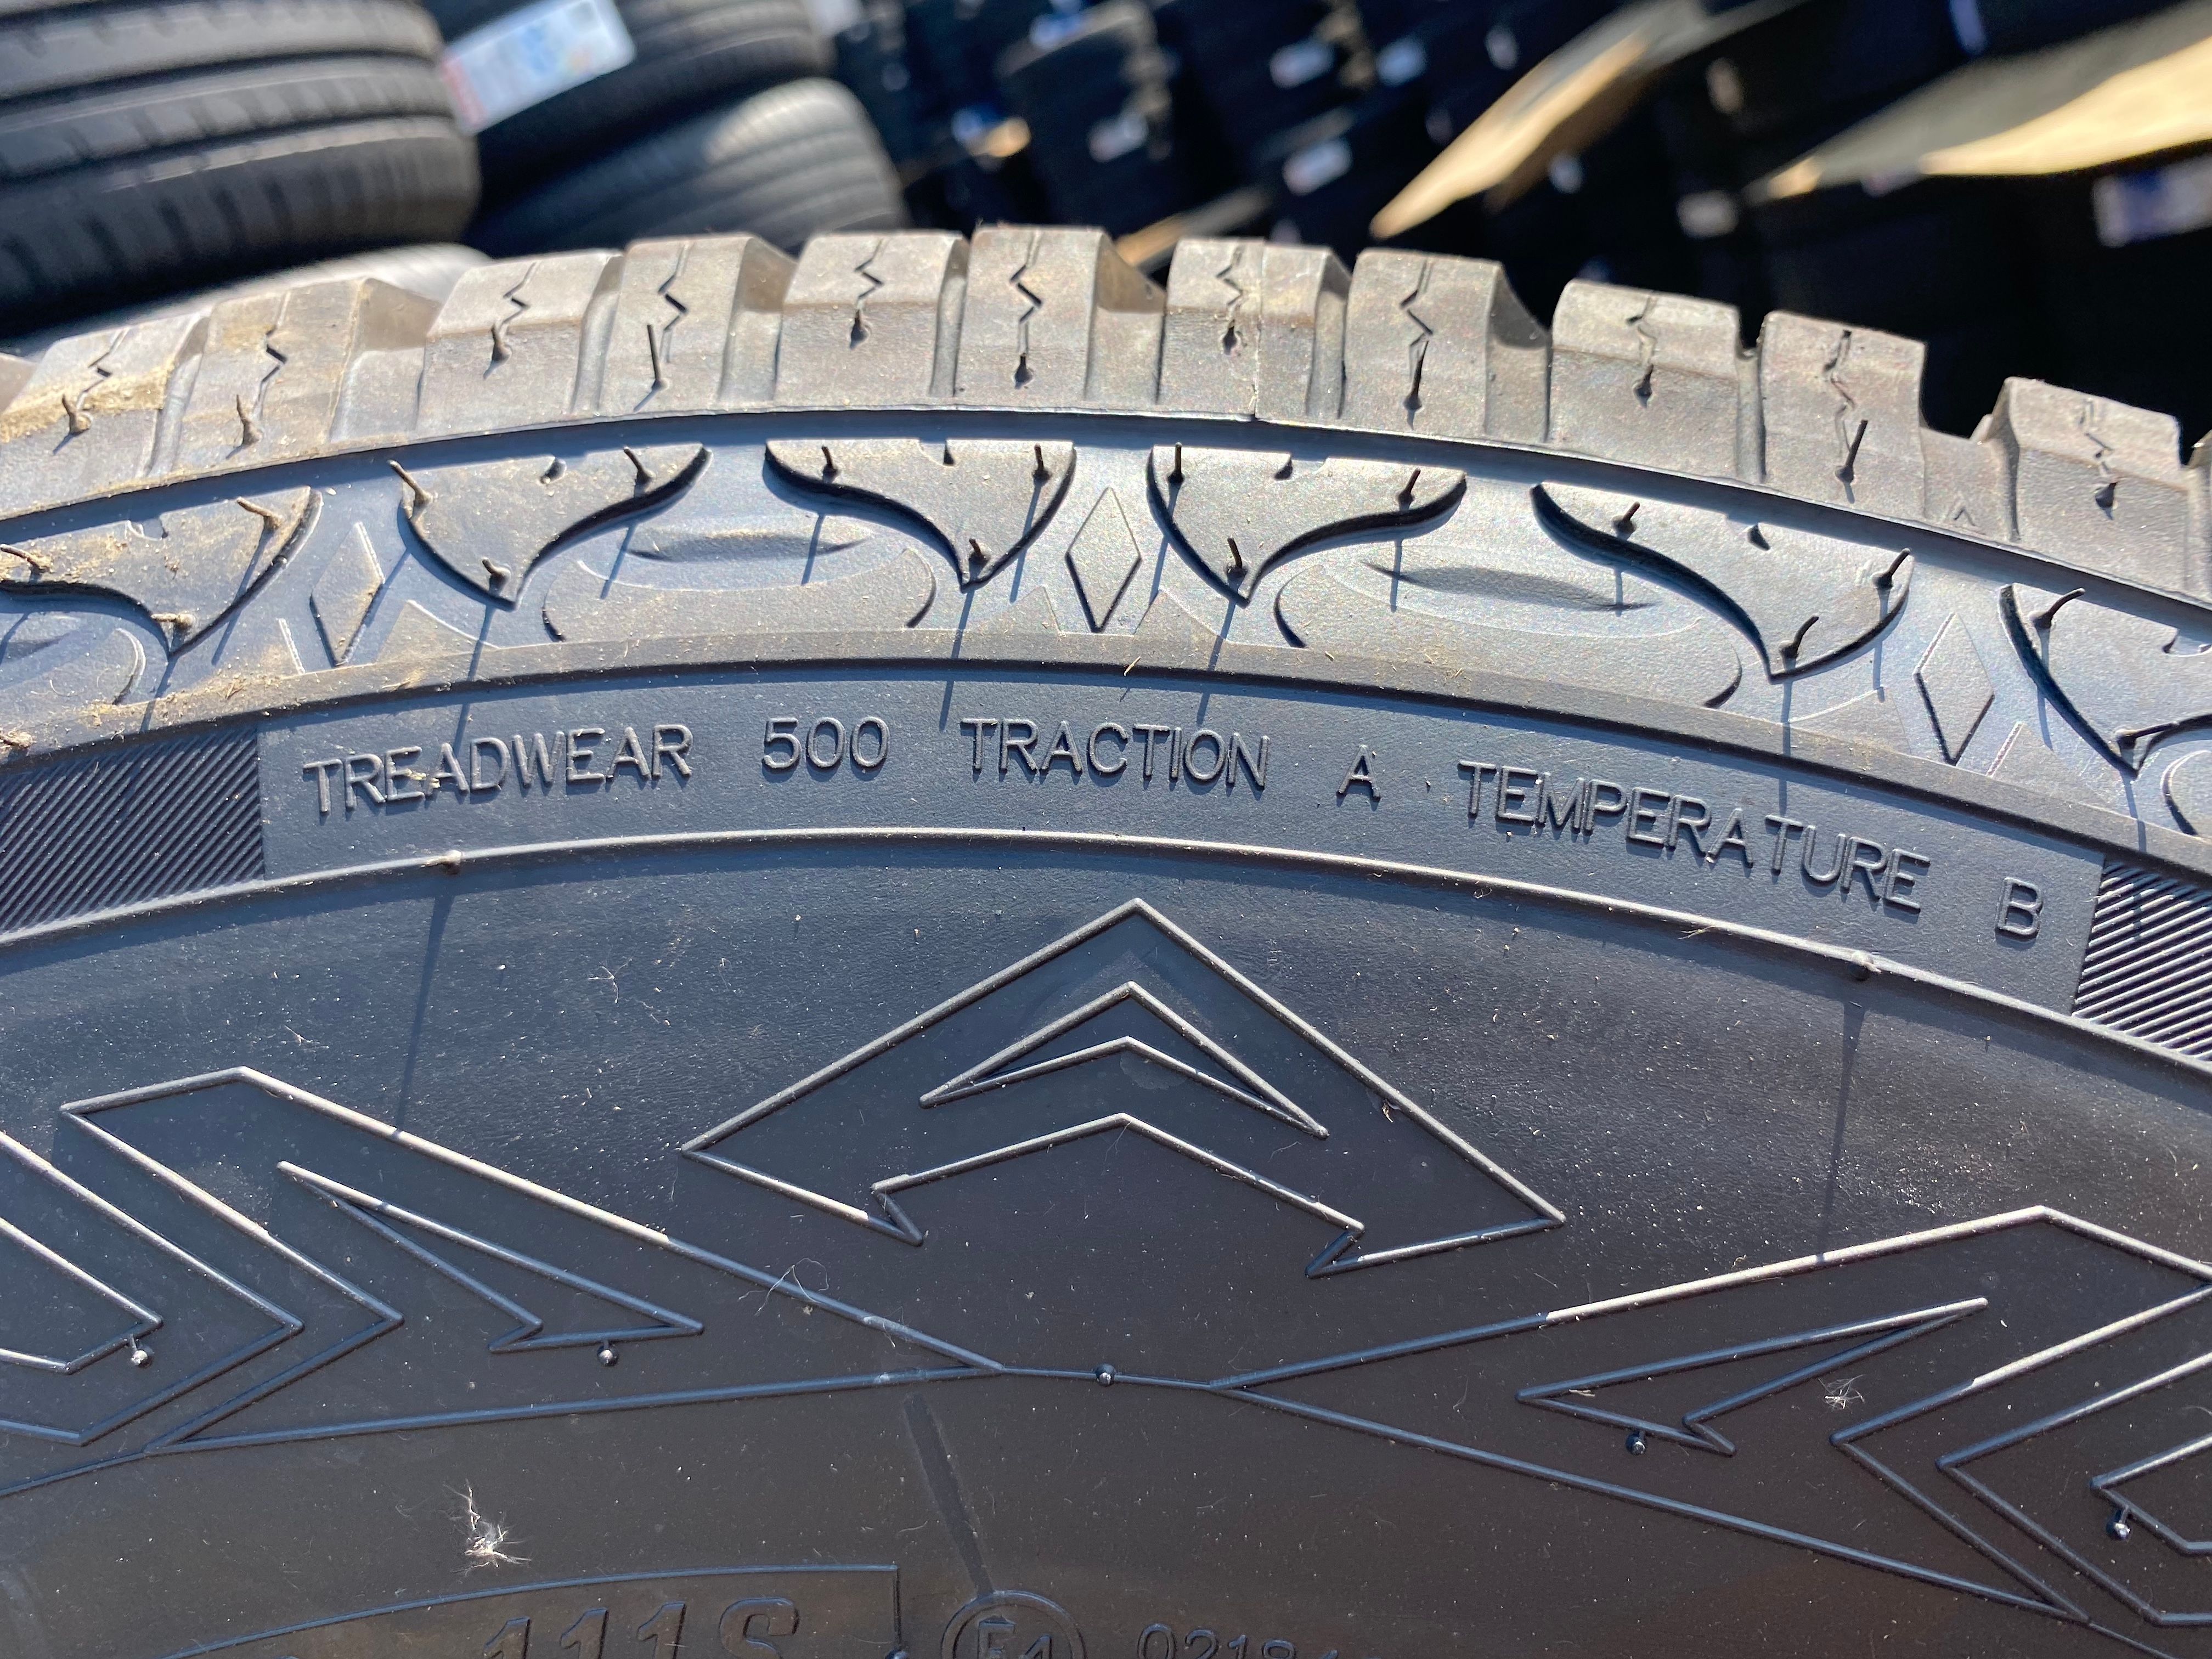 a close up of a tire sidewall showing the treadwear rating